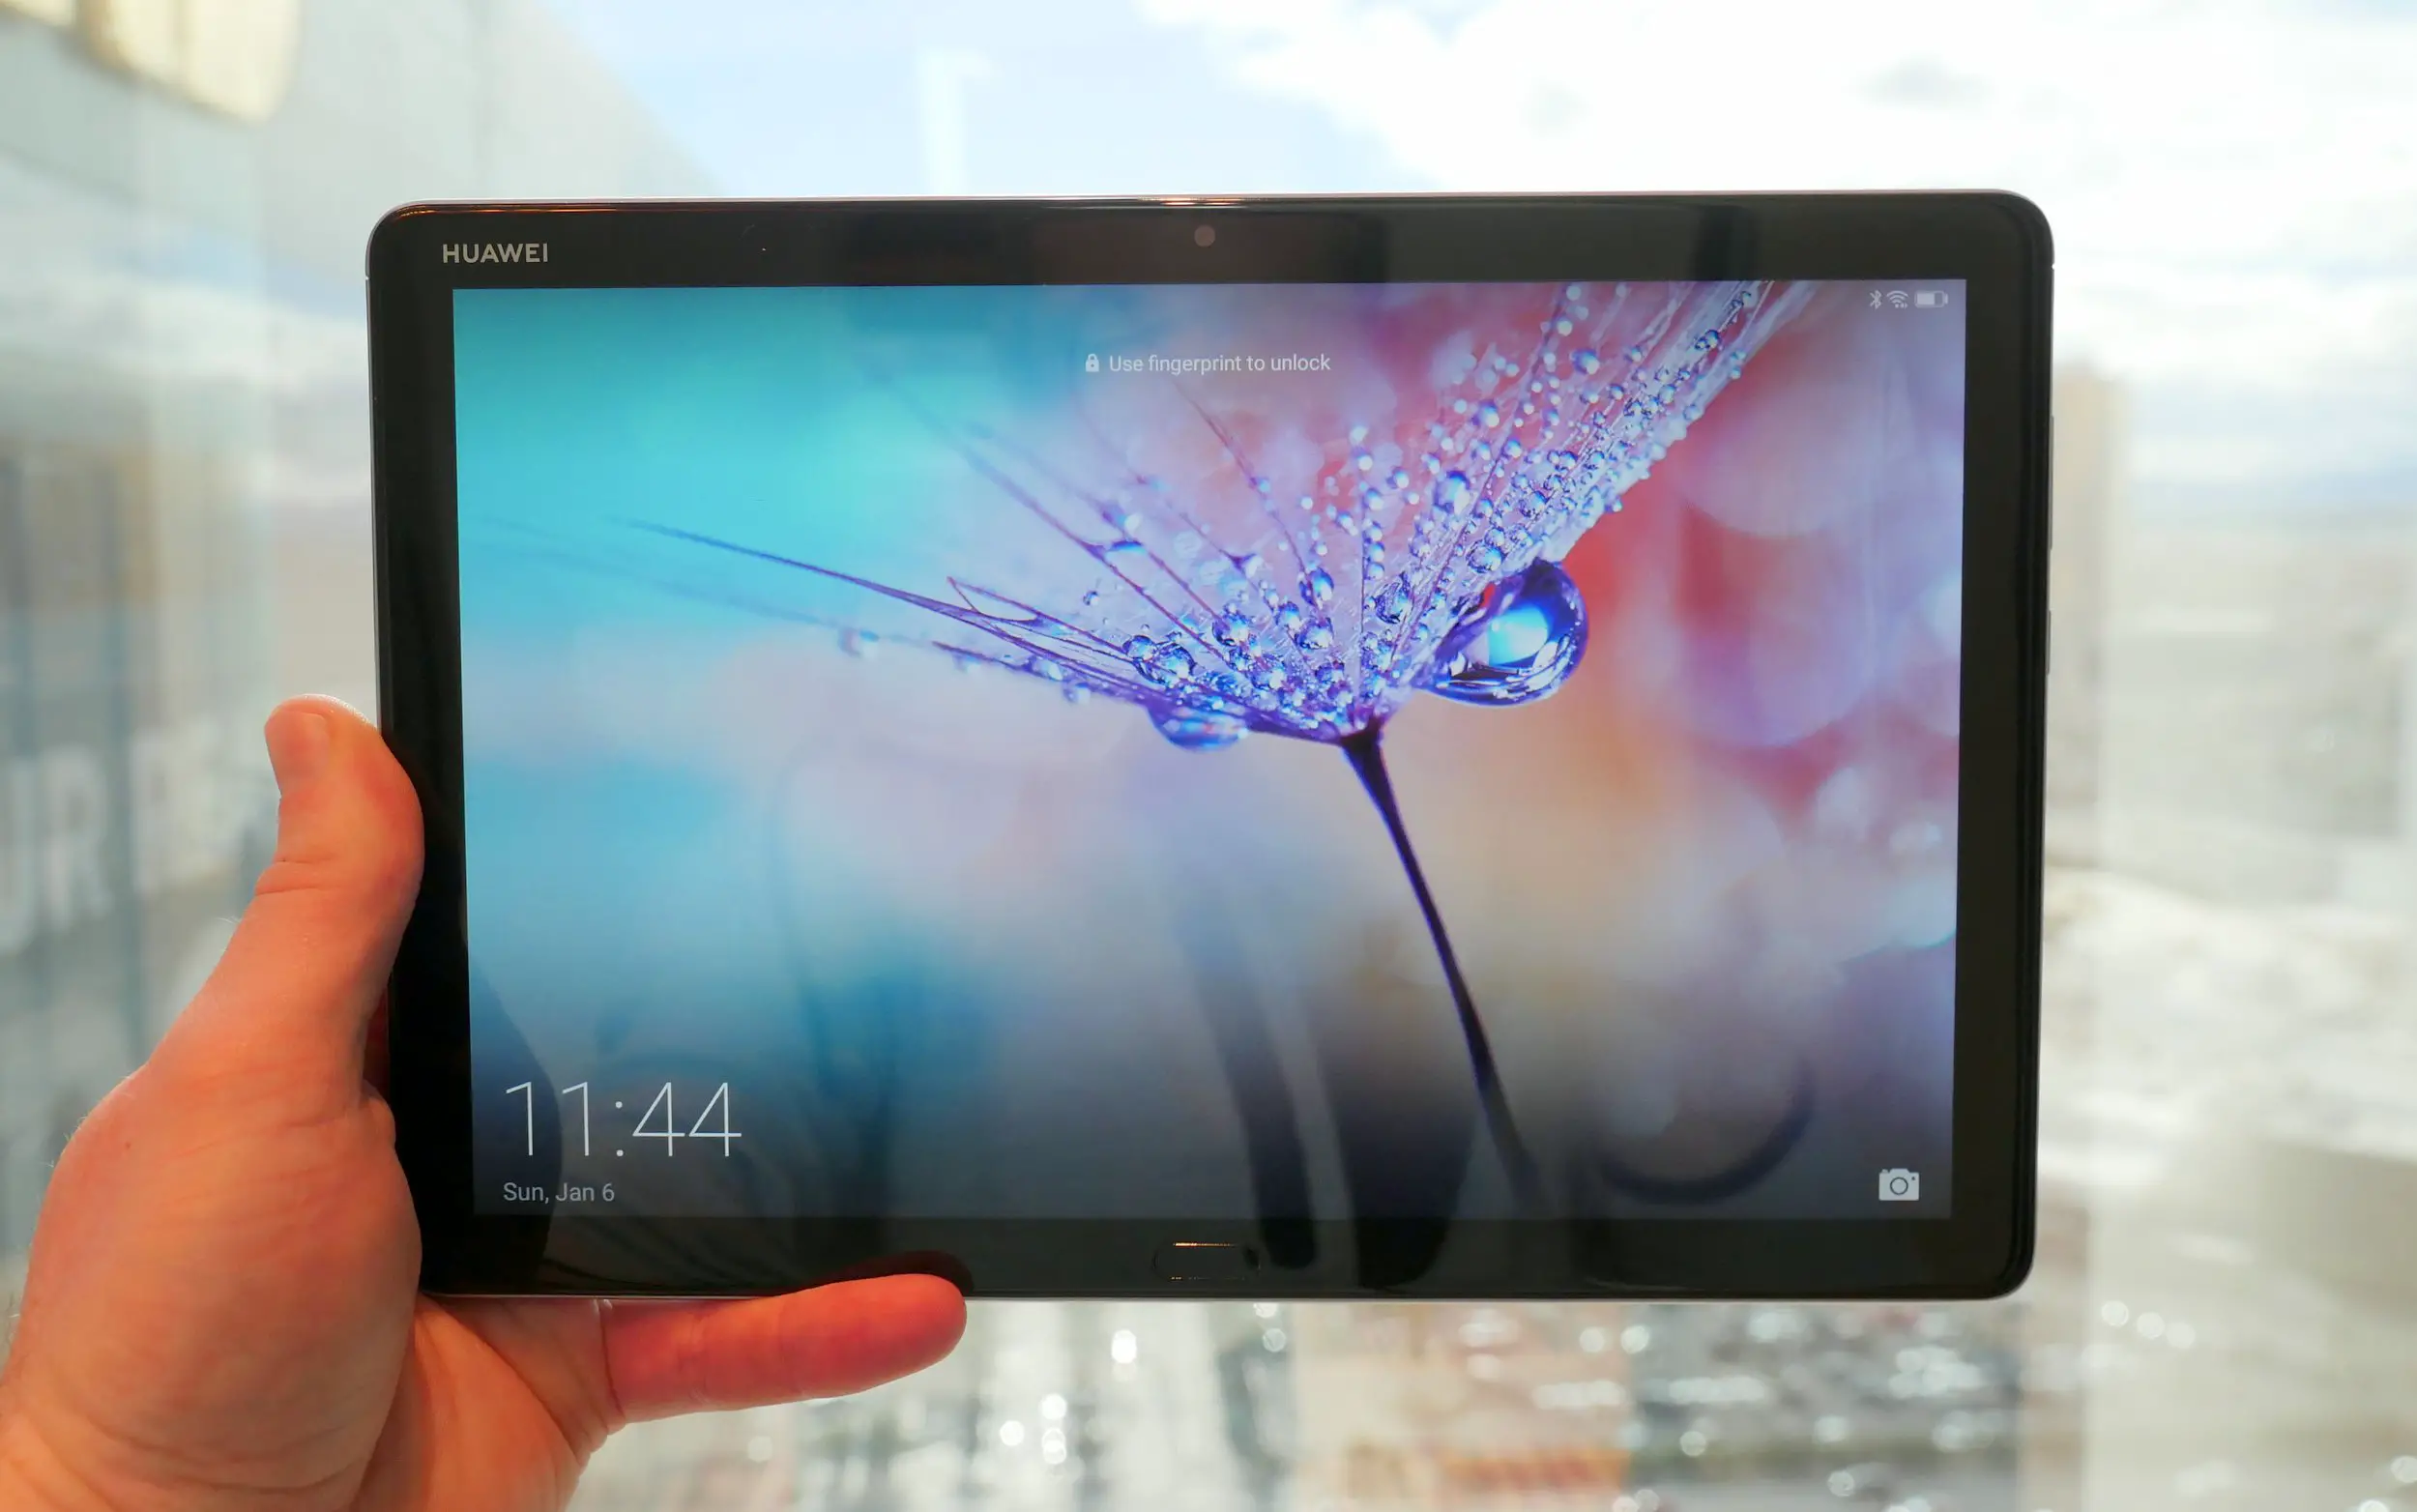 Top 5 accessories for the Huawei MediaPad M5 Lite - Phandroid